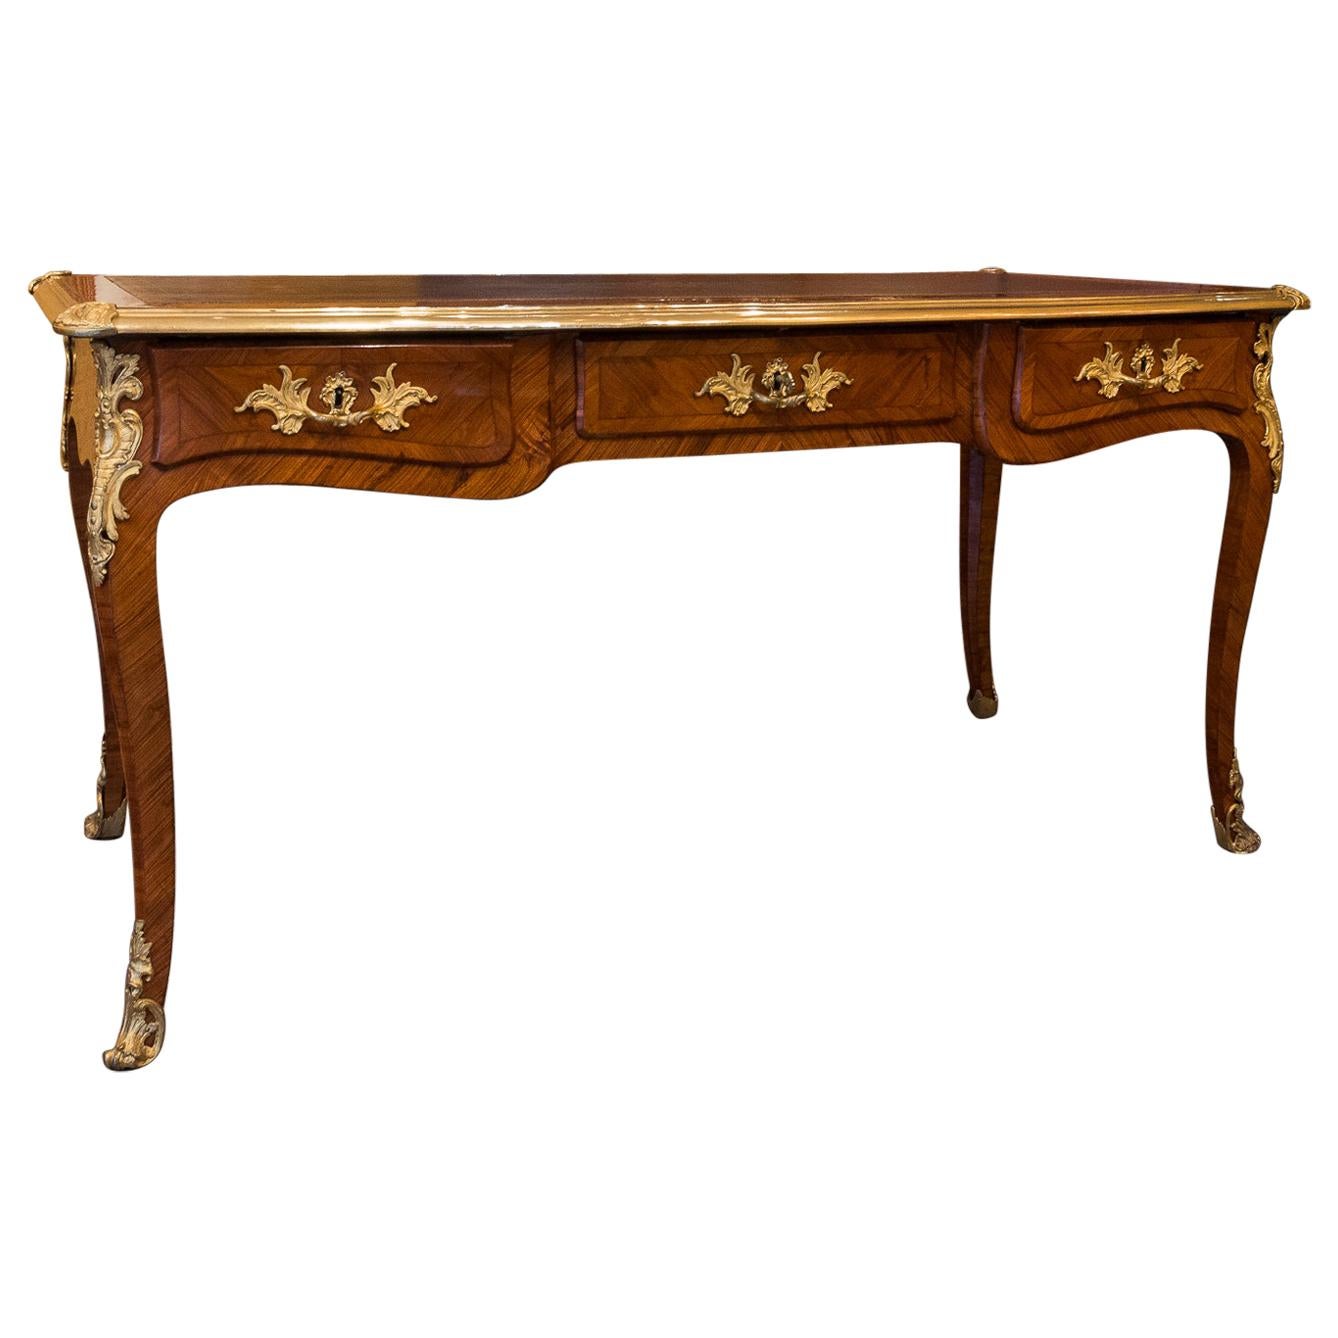 French Louis Period, Flat Violetwood Desk with Gilt-Bronze Decoration circa 1750 im Angebot